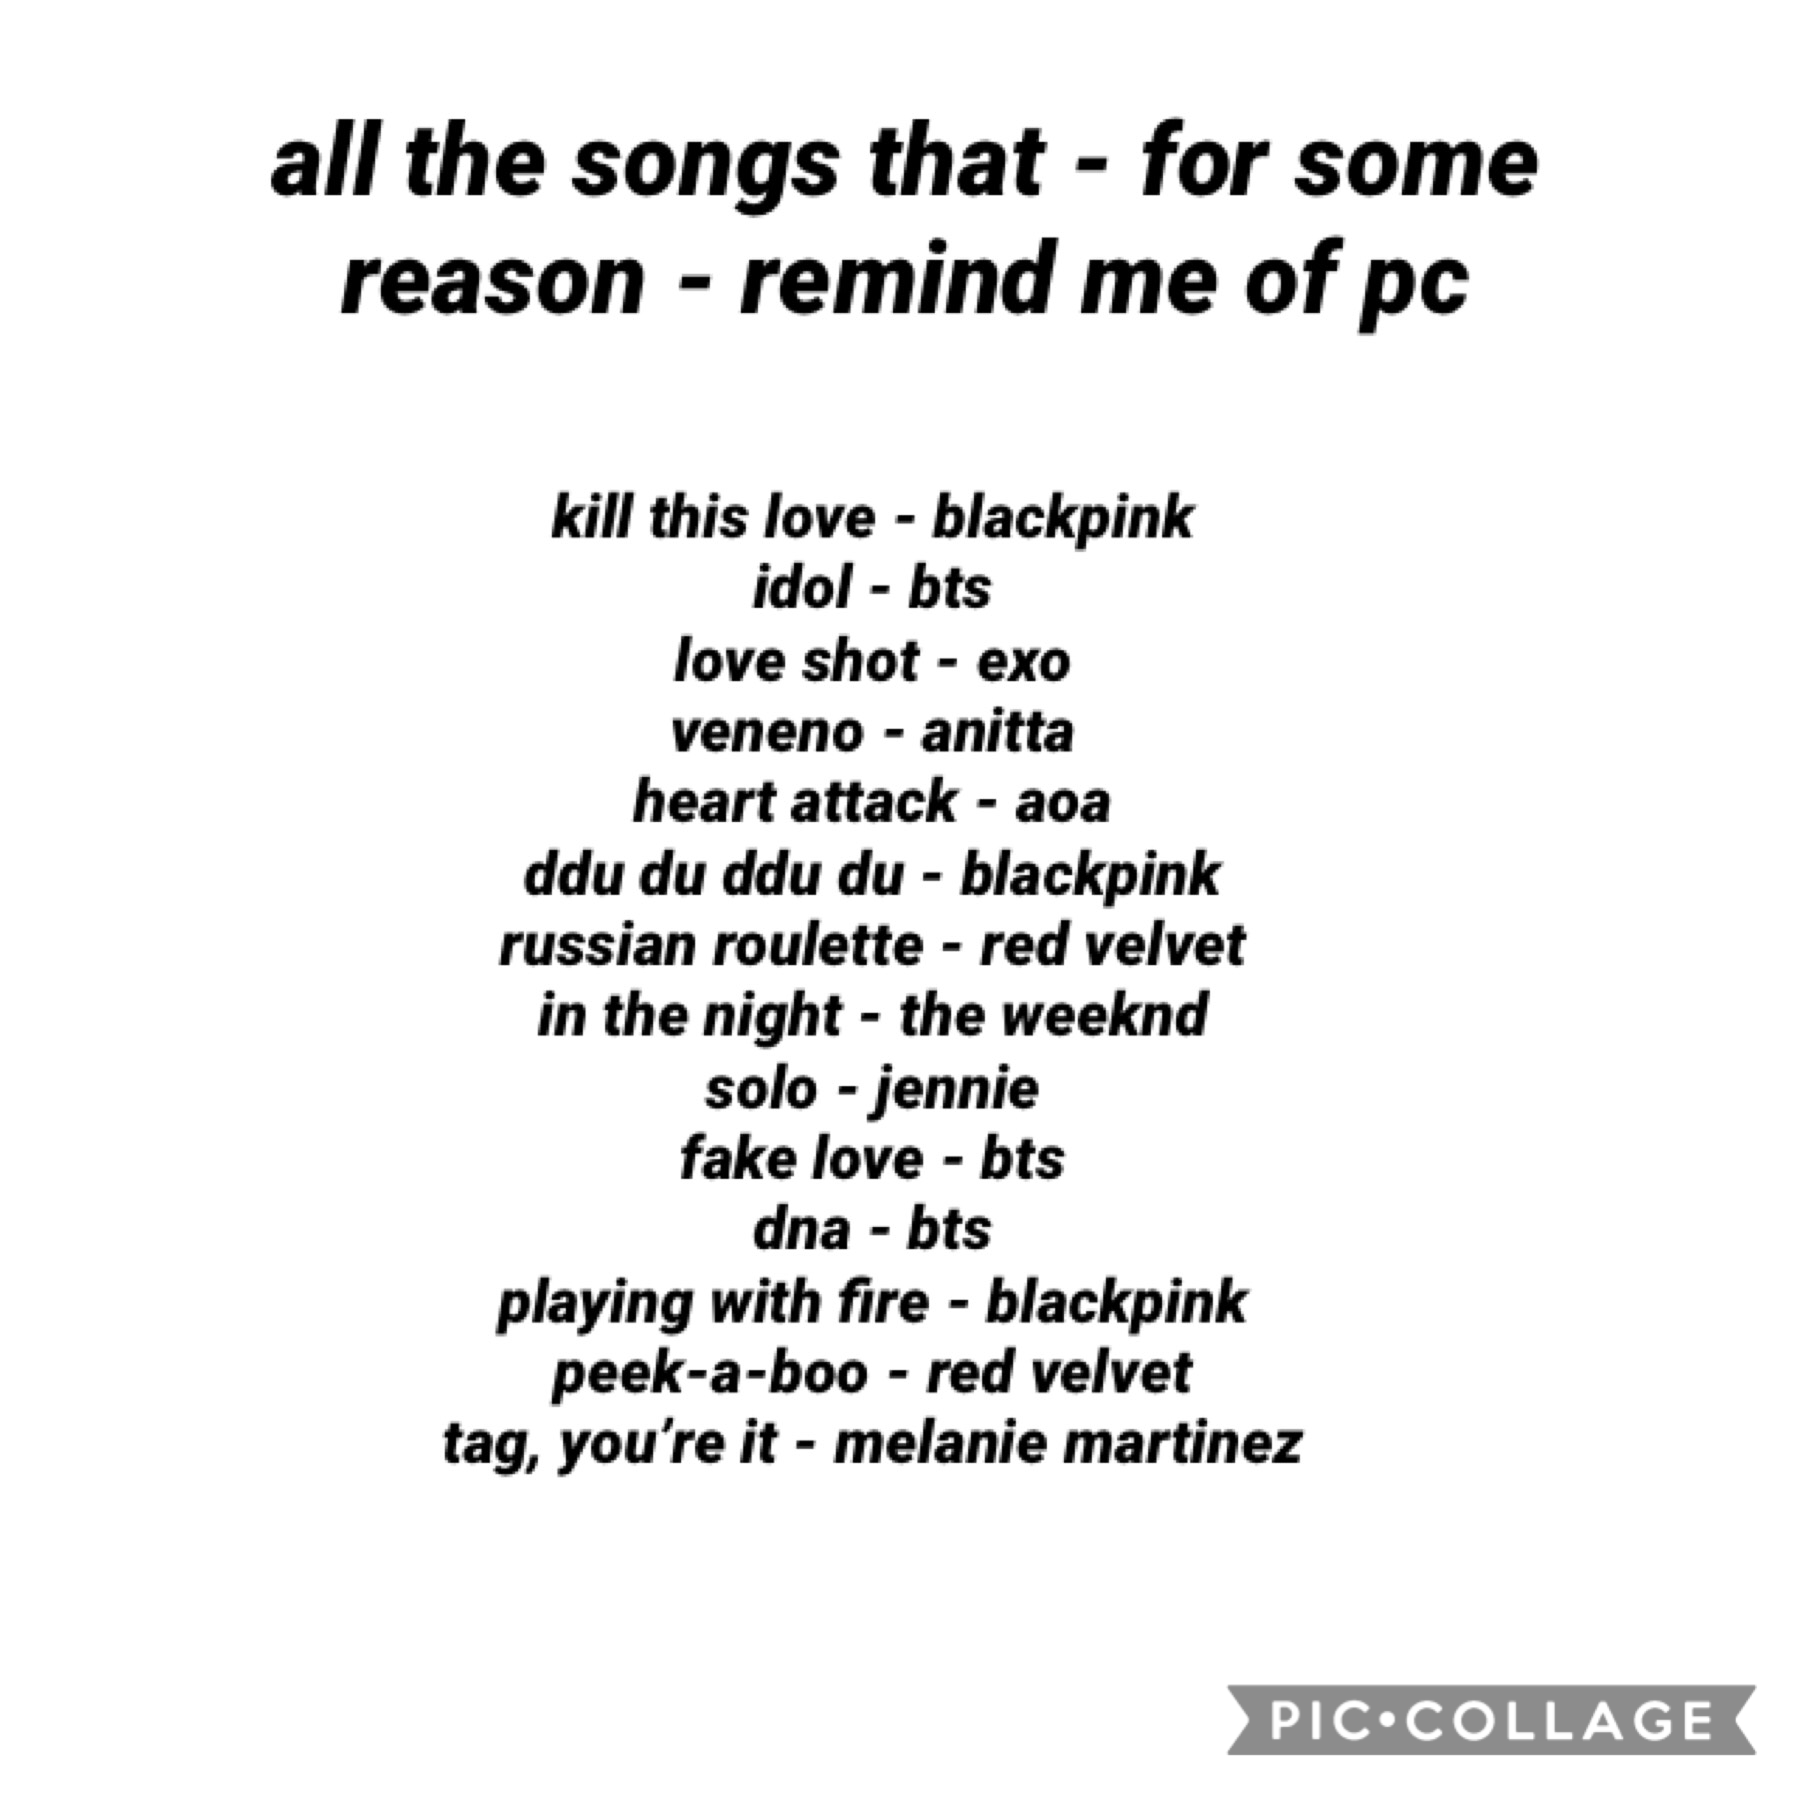 1 year on pc♡ ik it’s not important at all but these songs remind me of pc (and pc reminds me of these songs) so i just wanted to share this playlist with y’all owo